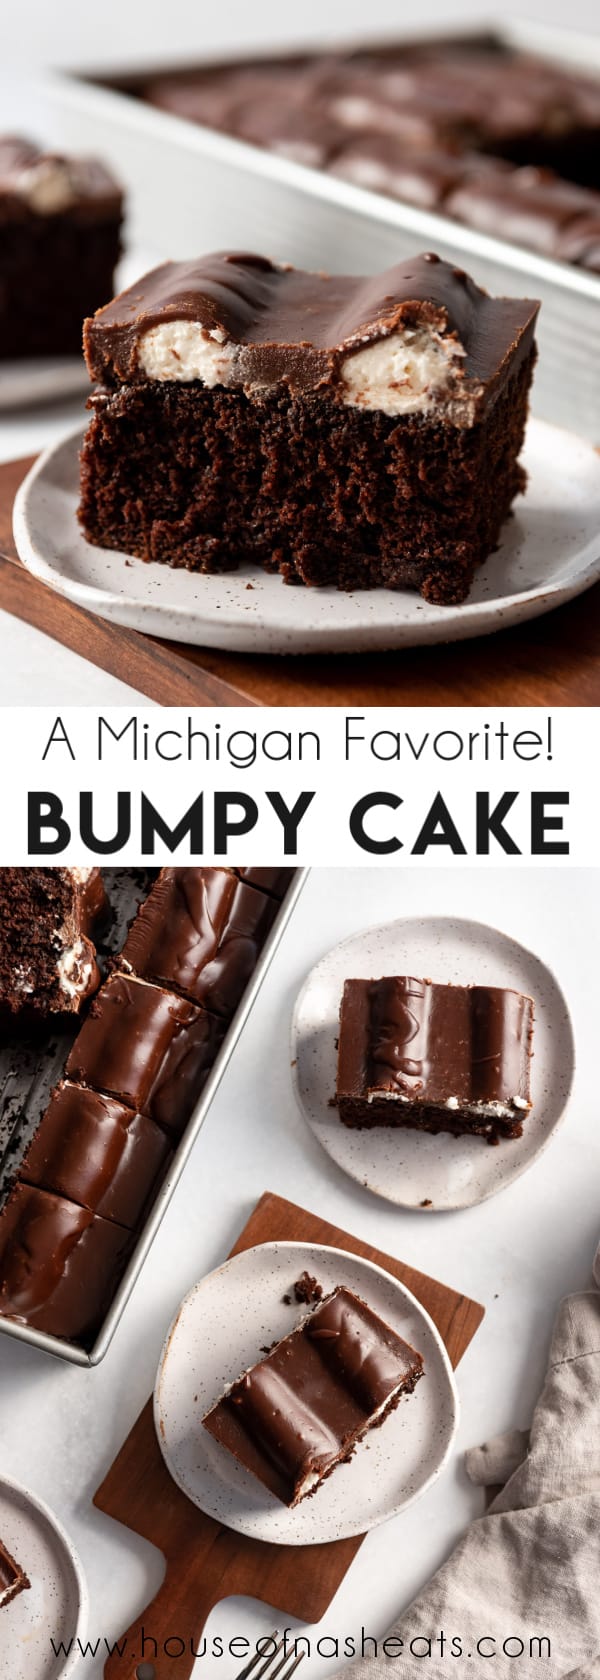 A collage of images of bumpy cake with text overlay.